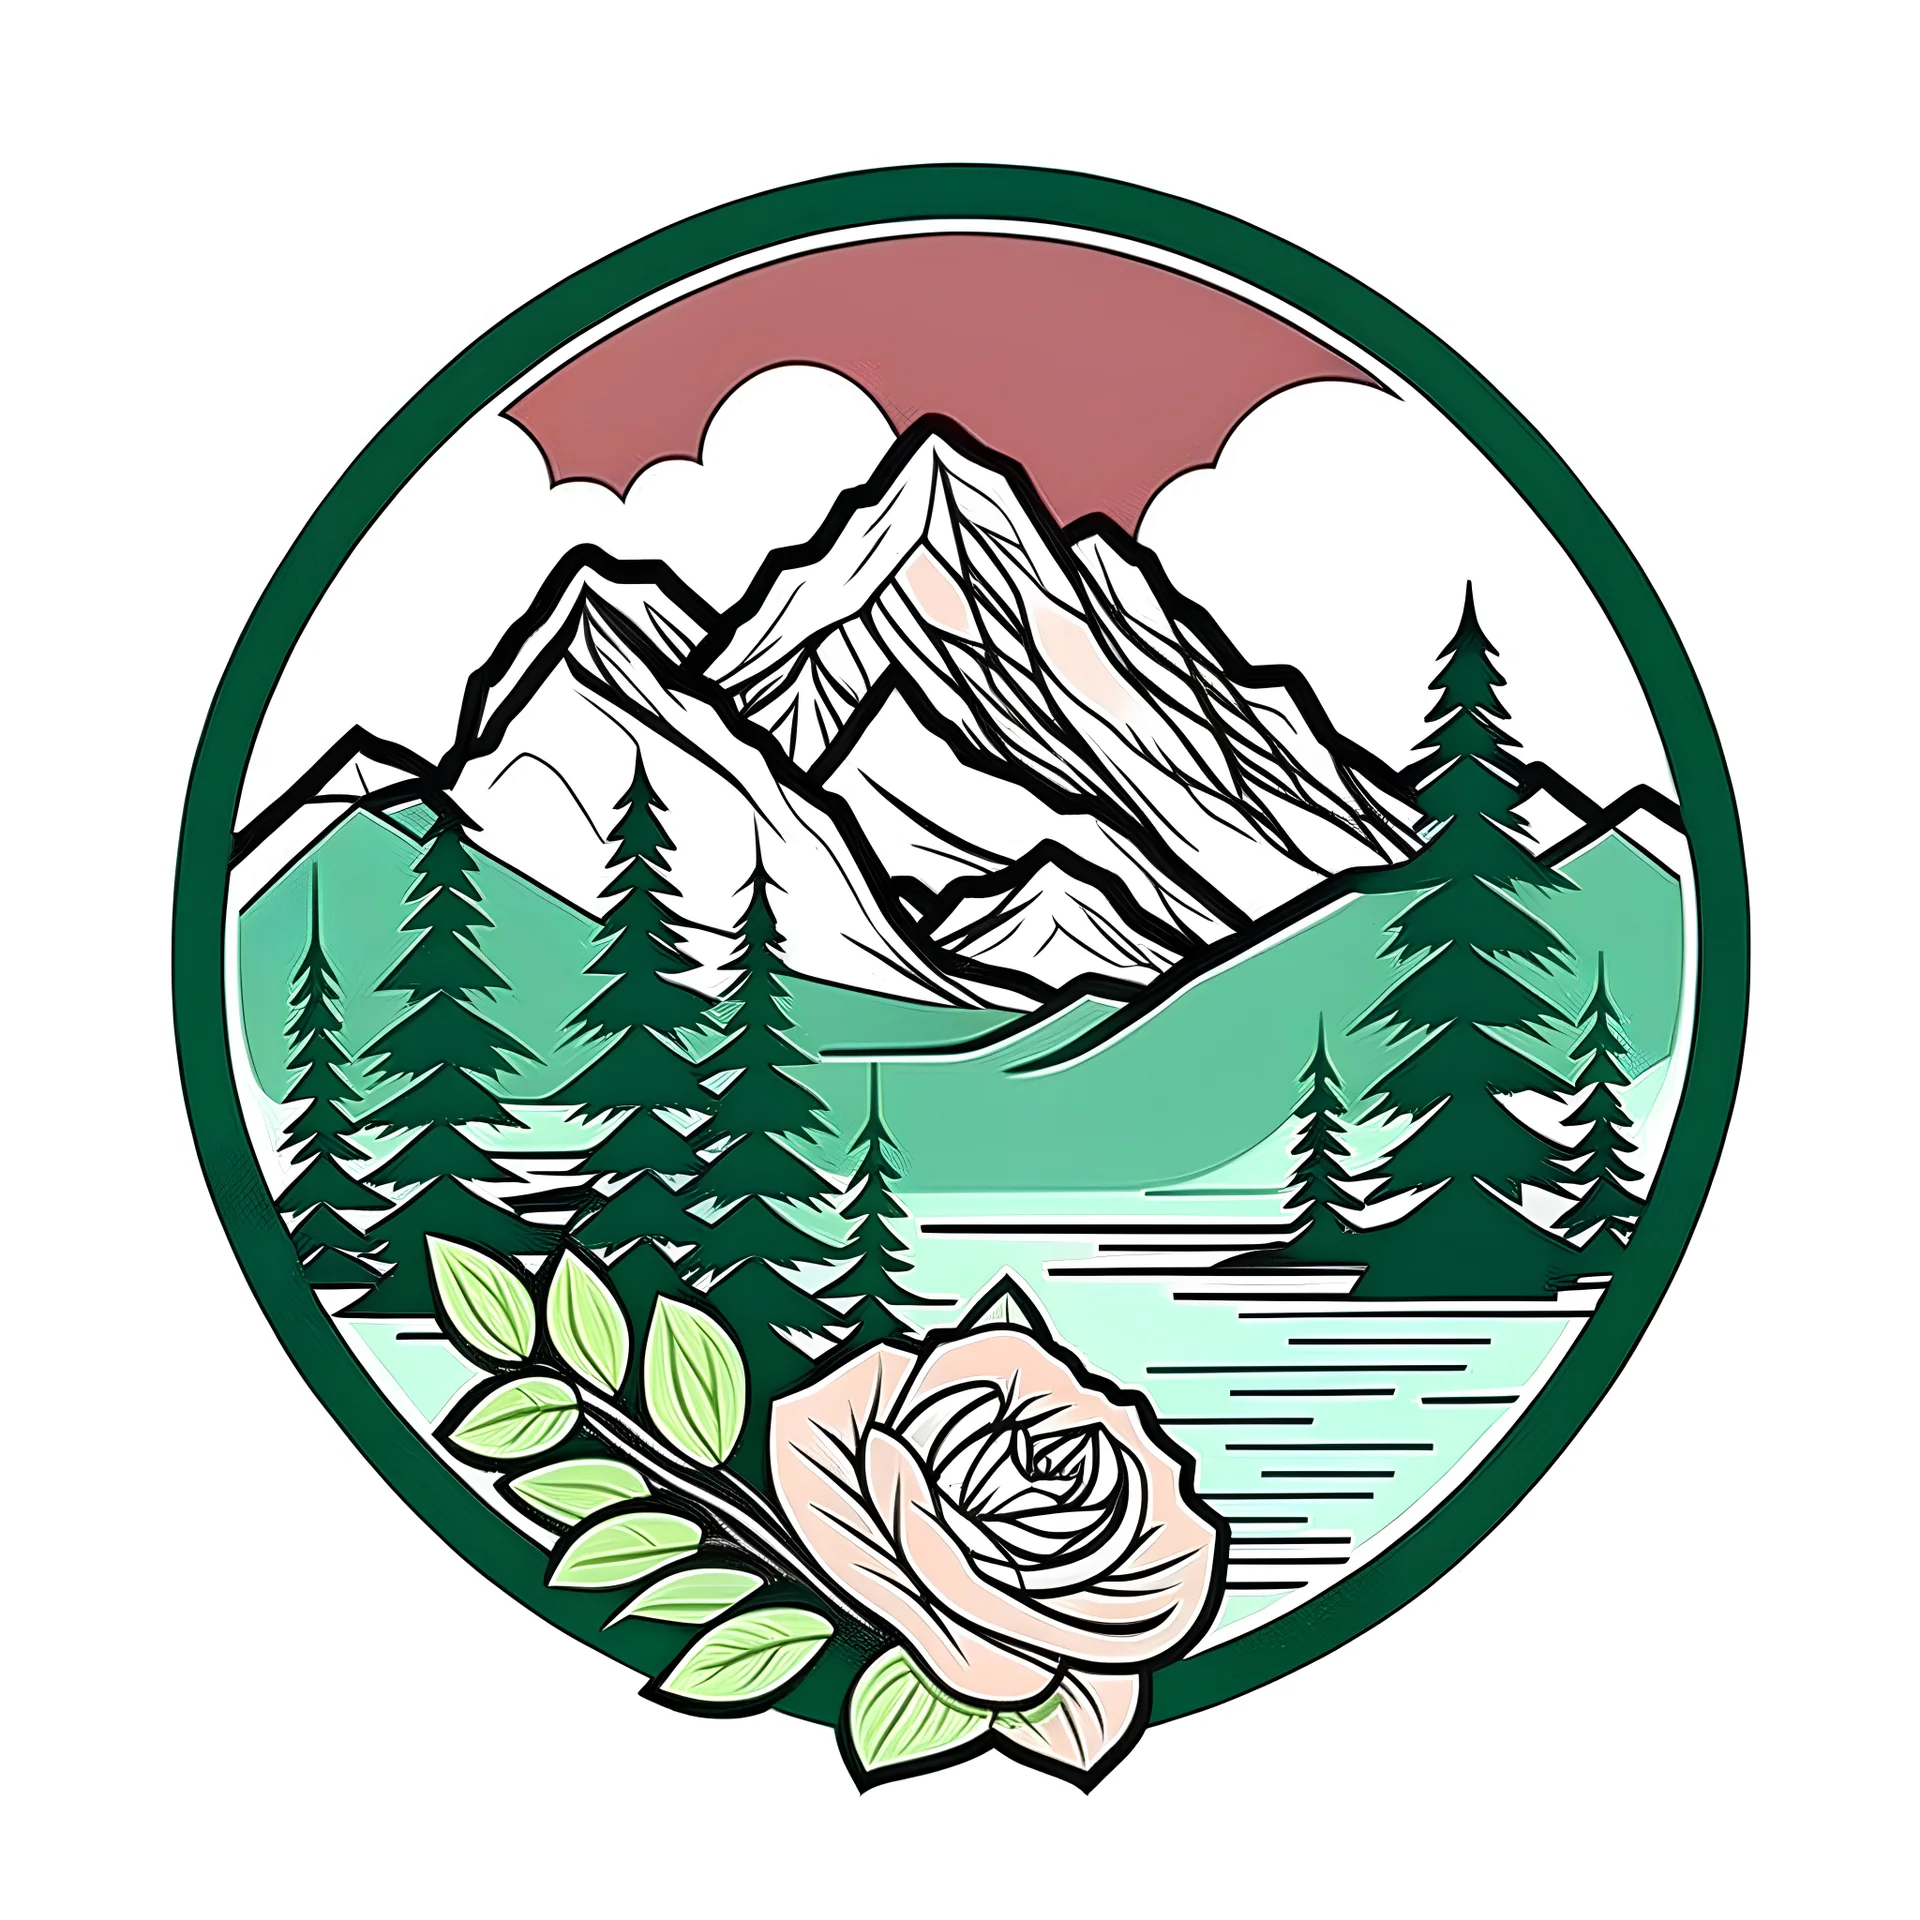 mountains river, Siberian cedar, rhododendron branch on the front, all on simple vector emblem